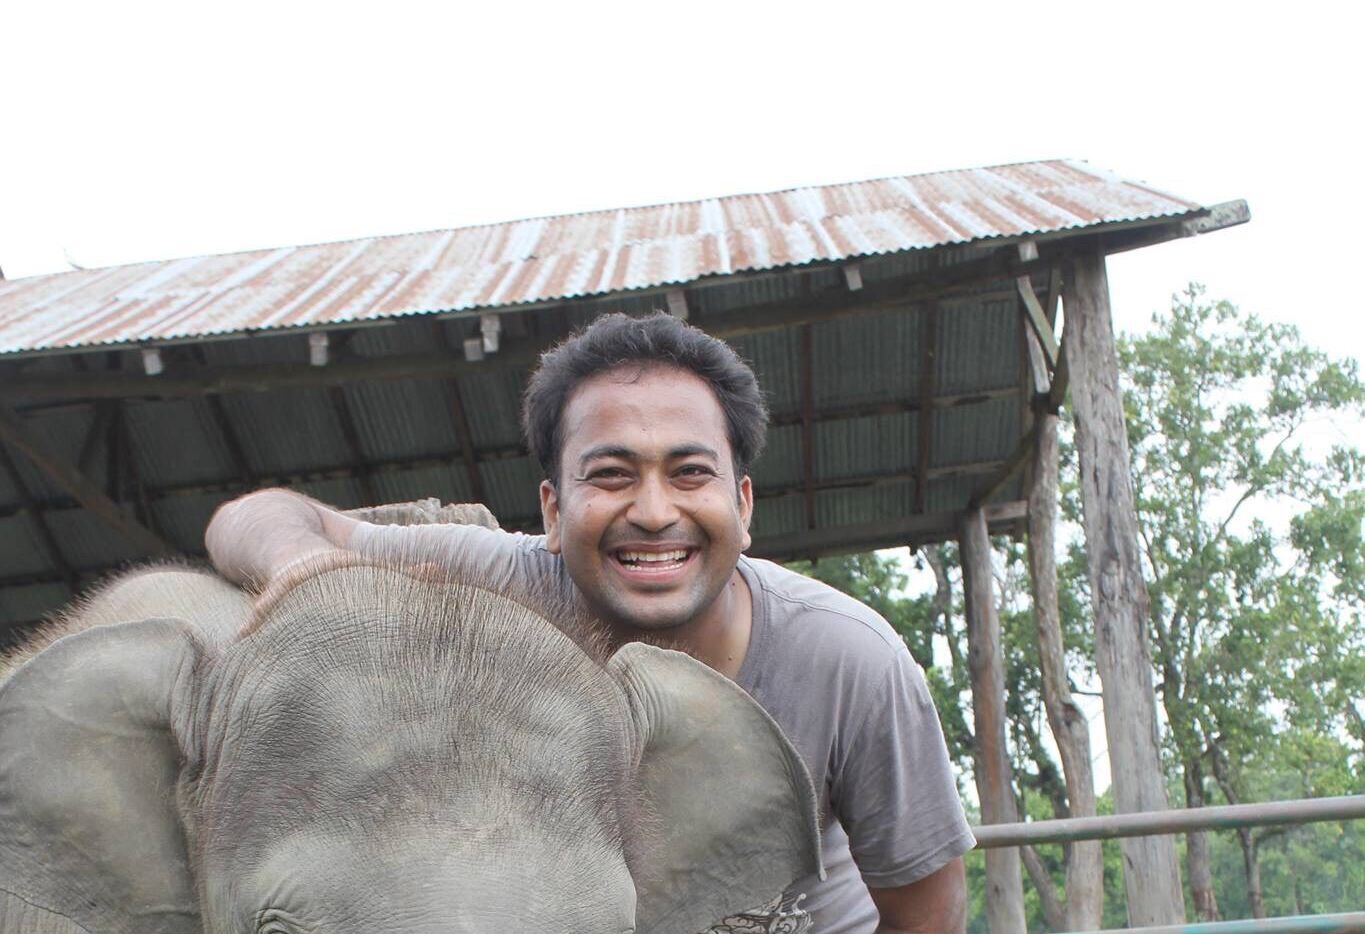 Akash Patel, a Spanish teacher at Dallas' Ignite Middle School, uses his own travels to connect his students to others around the world. The middle schoolers were particularly interested in his stories about is work as an elephant conservation intern in June 2018 at the Chitwan National Park in Nepal. Patel was recently elected president of the American Council on the Teaching of Foreign Languages, an international organization for educators.